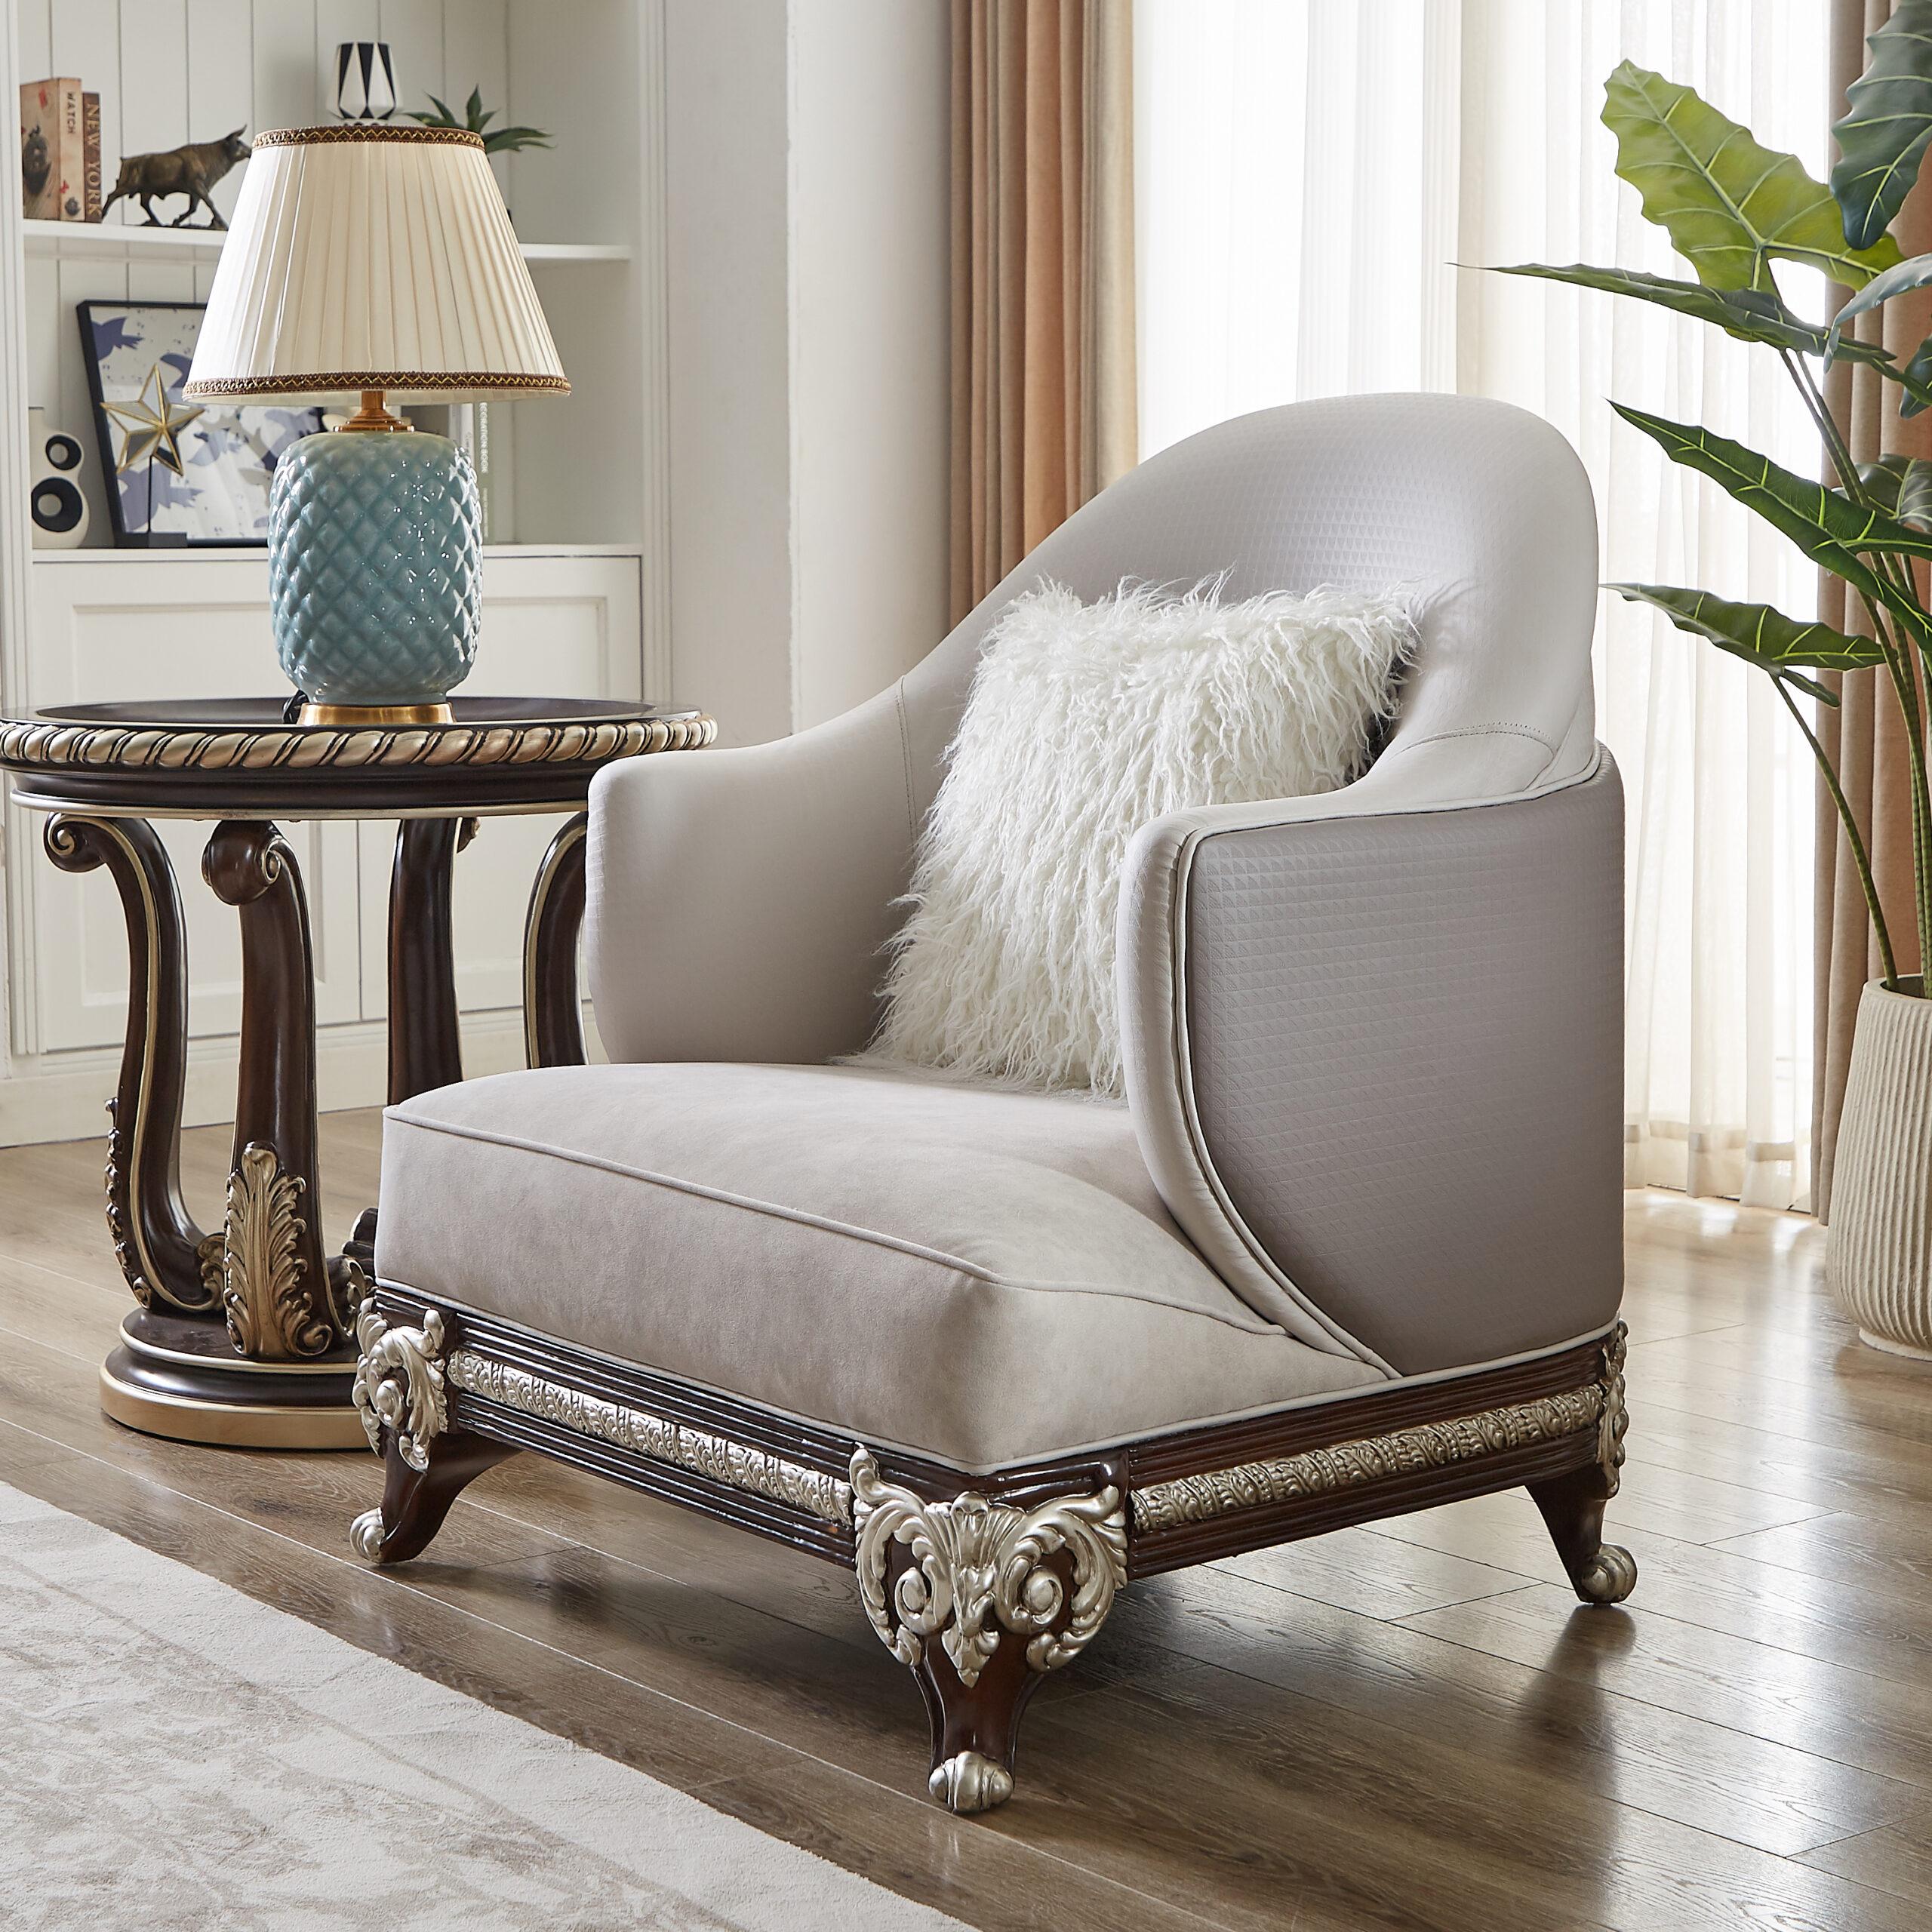 Classic, Traditional Chair HD-9030 Chair HD-C9030 HD-C9030 in Light Gray, Gold Fabric